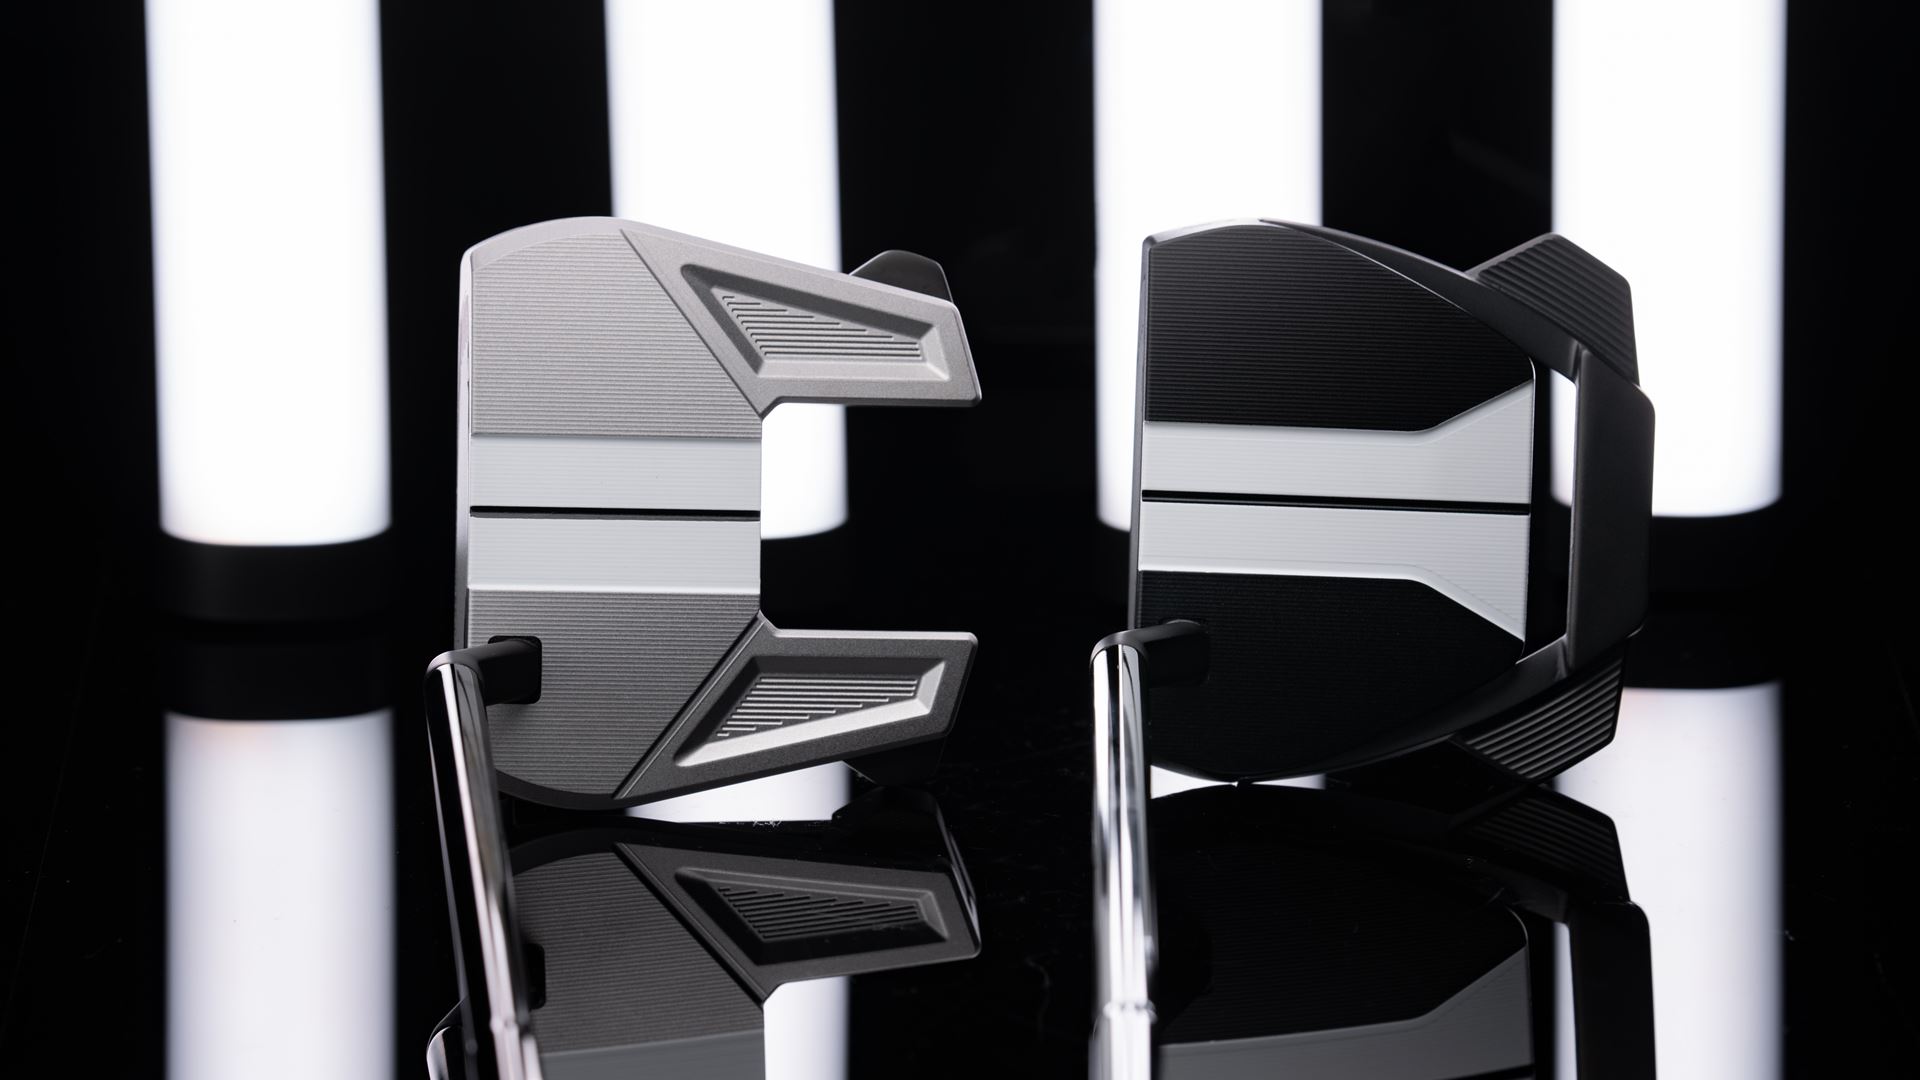 TaylorMade Golf Announces All-New Spider GTX and Spider GT Max Putters, Expanding the Acclaimed Franchise to Include More Color Options and Movable Weight Technology